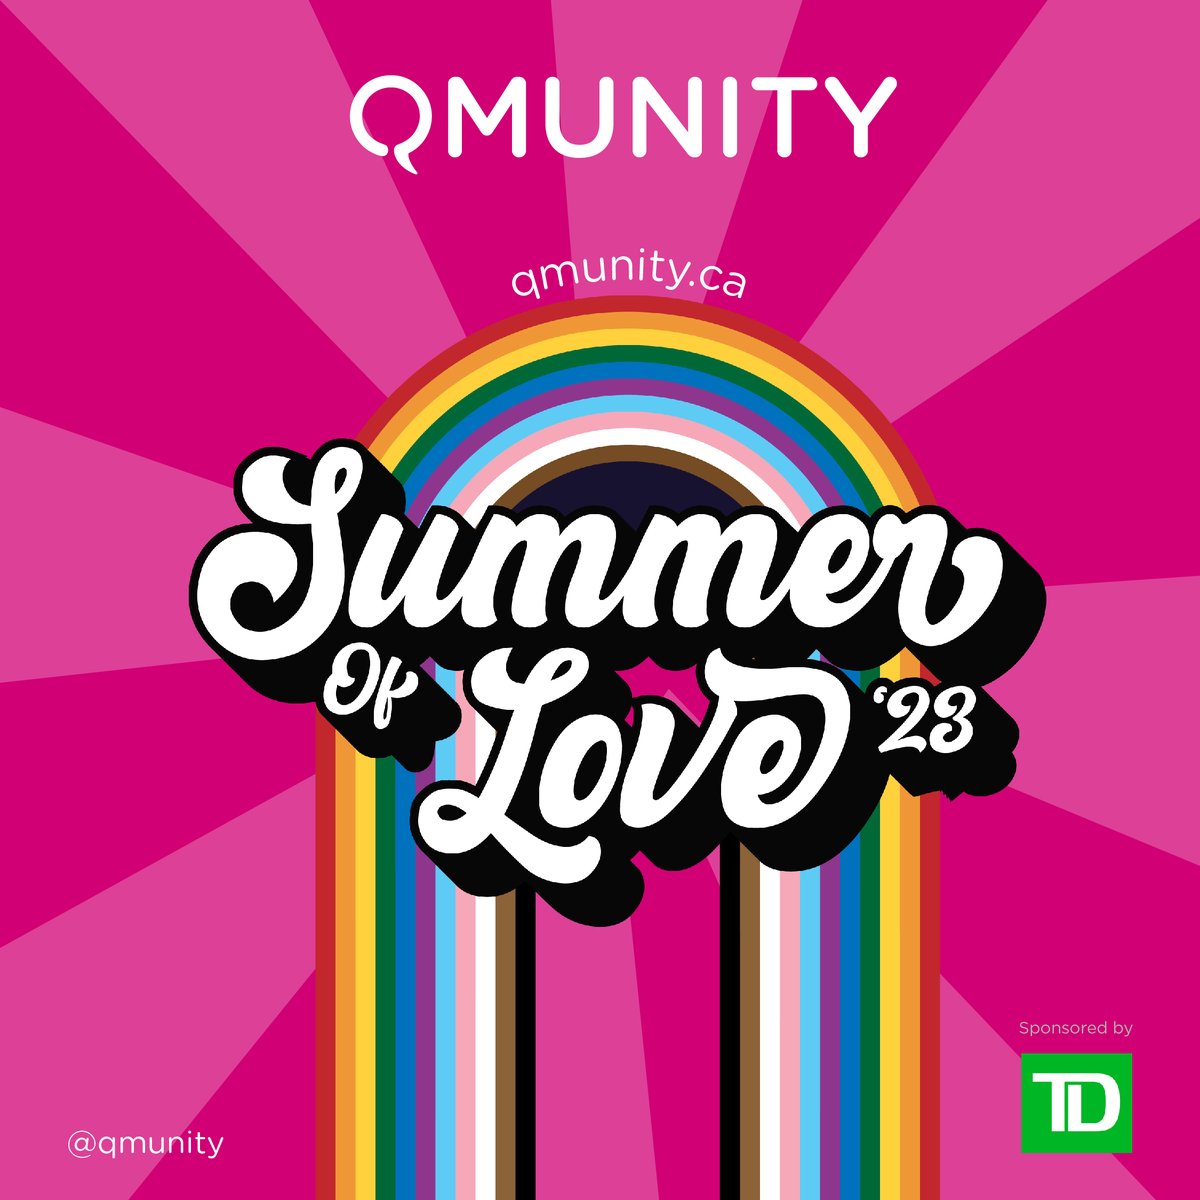 ❤️🧡💛💚💙 💜🖤🤎 Love knows no boundaries. ❤️🧡💛💚💙 💜🖤🤎 Today we launch our Summer of Love '23 campaign, where we travel across BC, weaving a tapestry of love and acceptance in every community we visit! Learn more at qmunity.ca/summer-of-love #SummerOfLove23 #Pride #BCpride